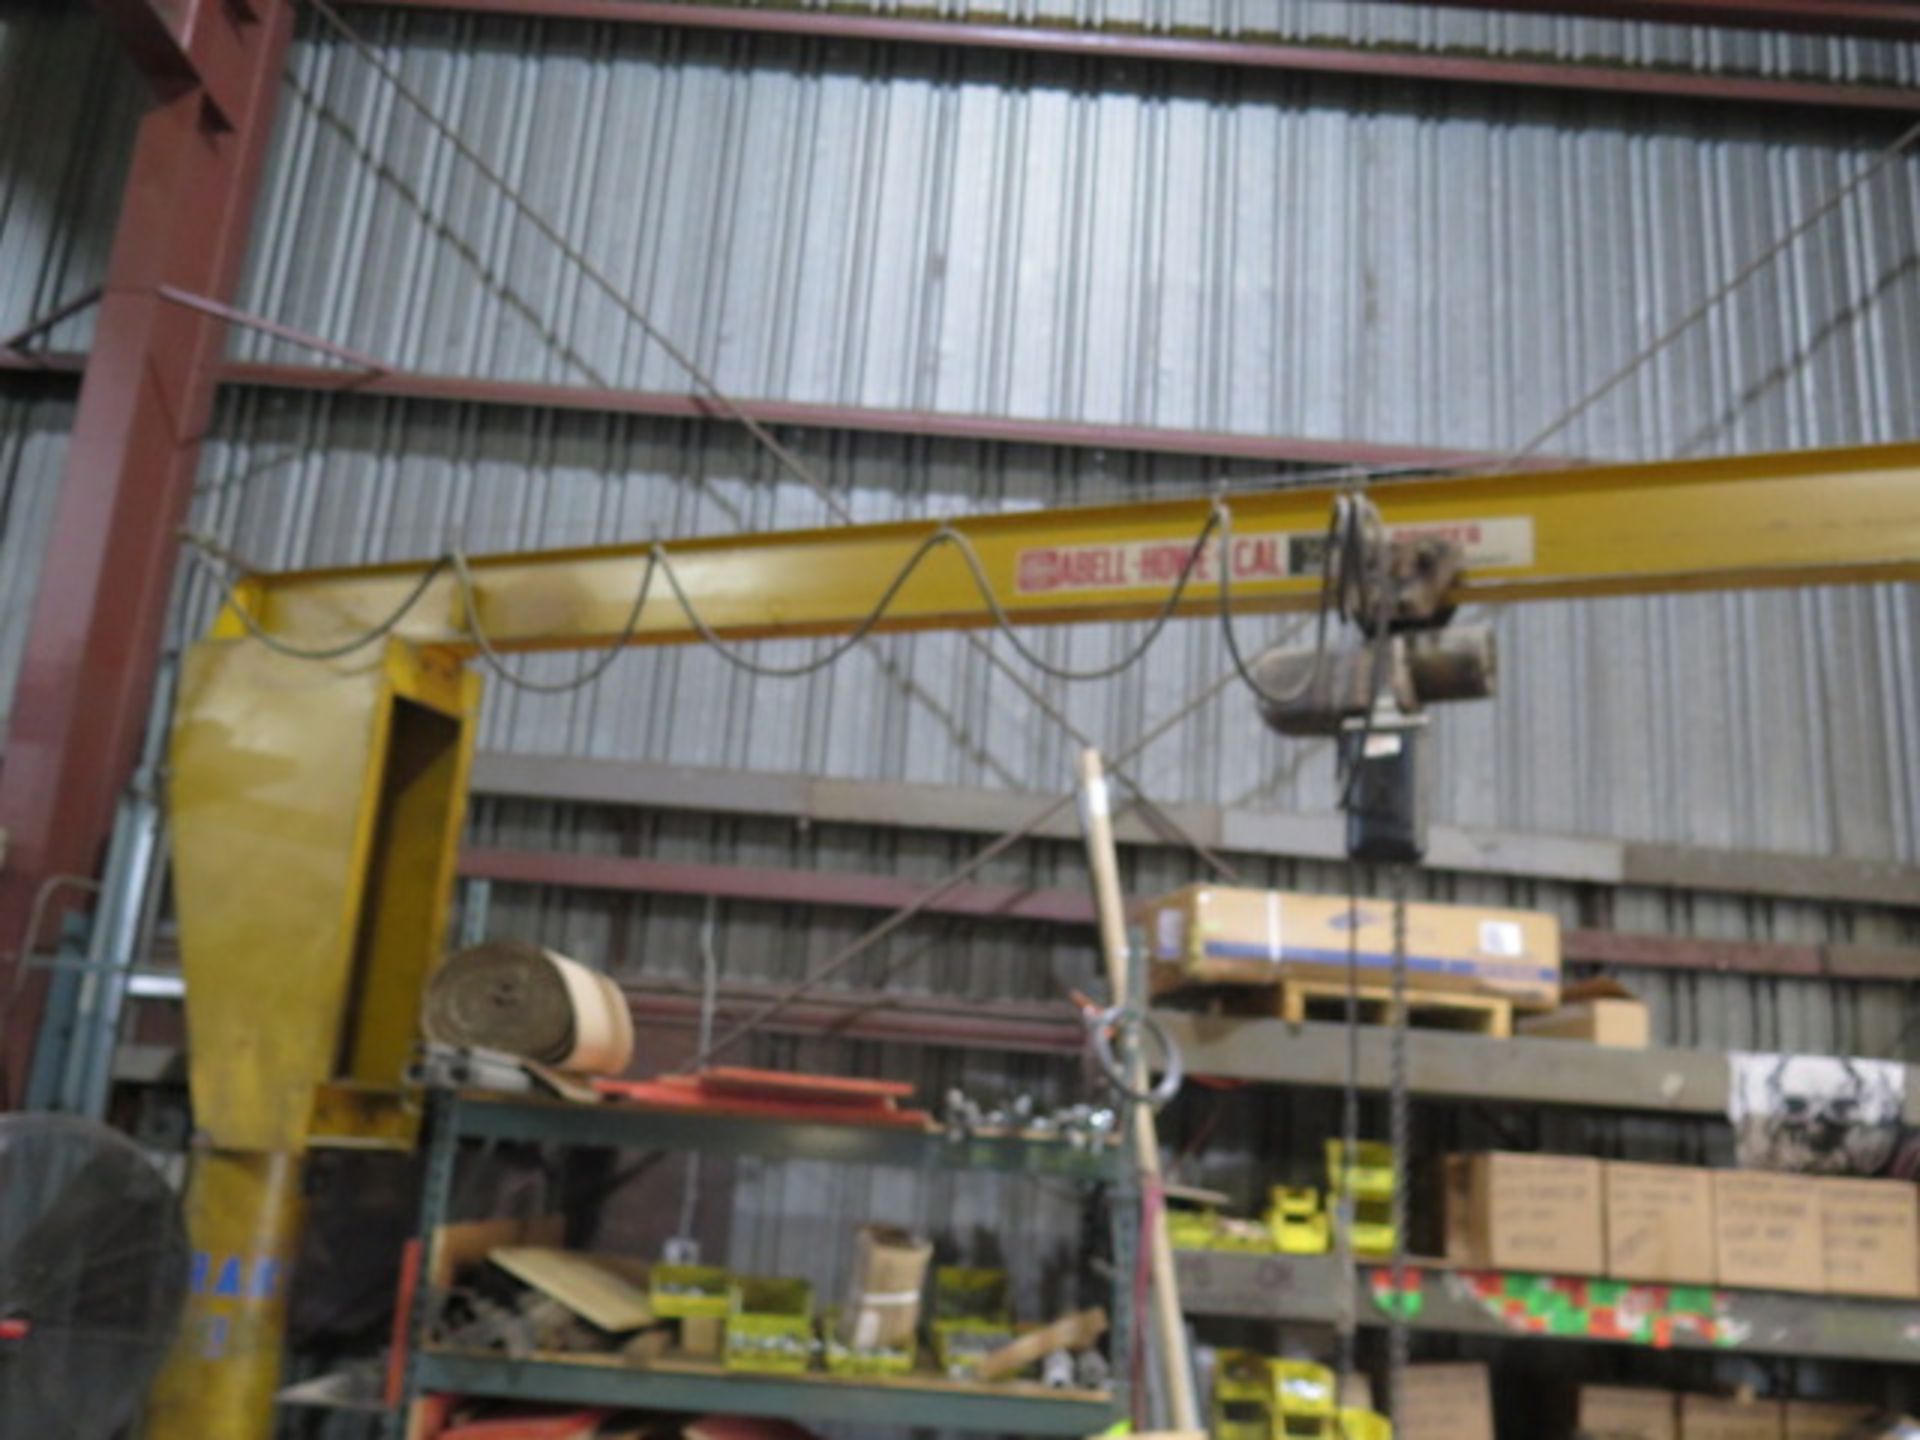 Abell-Howe 1/2 Ton Floor Mounted Jib Crane w/ Electric Hoist (SOLD AS-IS - NO WARRANTY) - Image 3 of 7